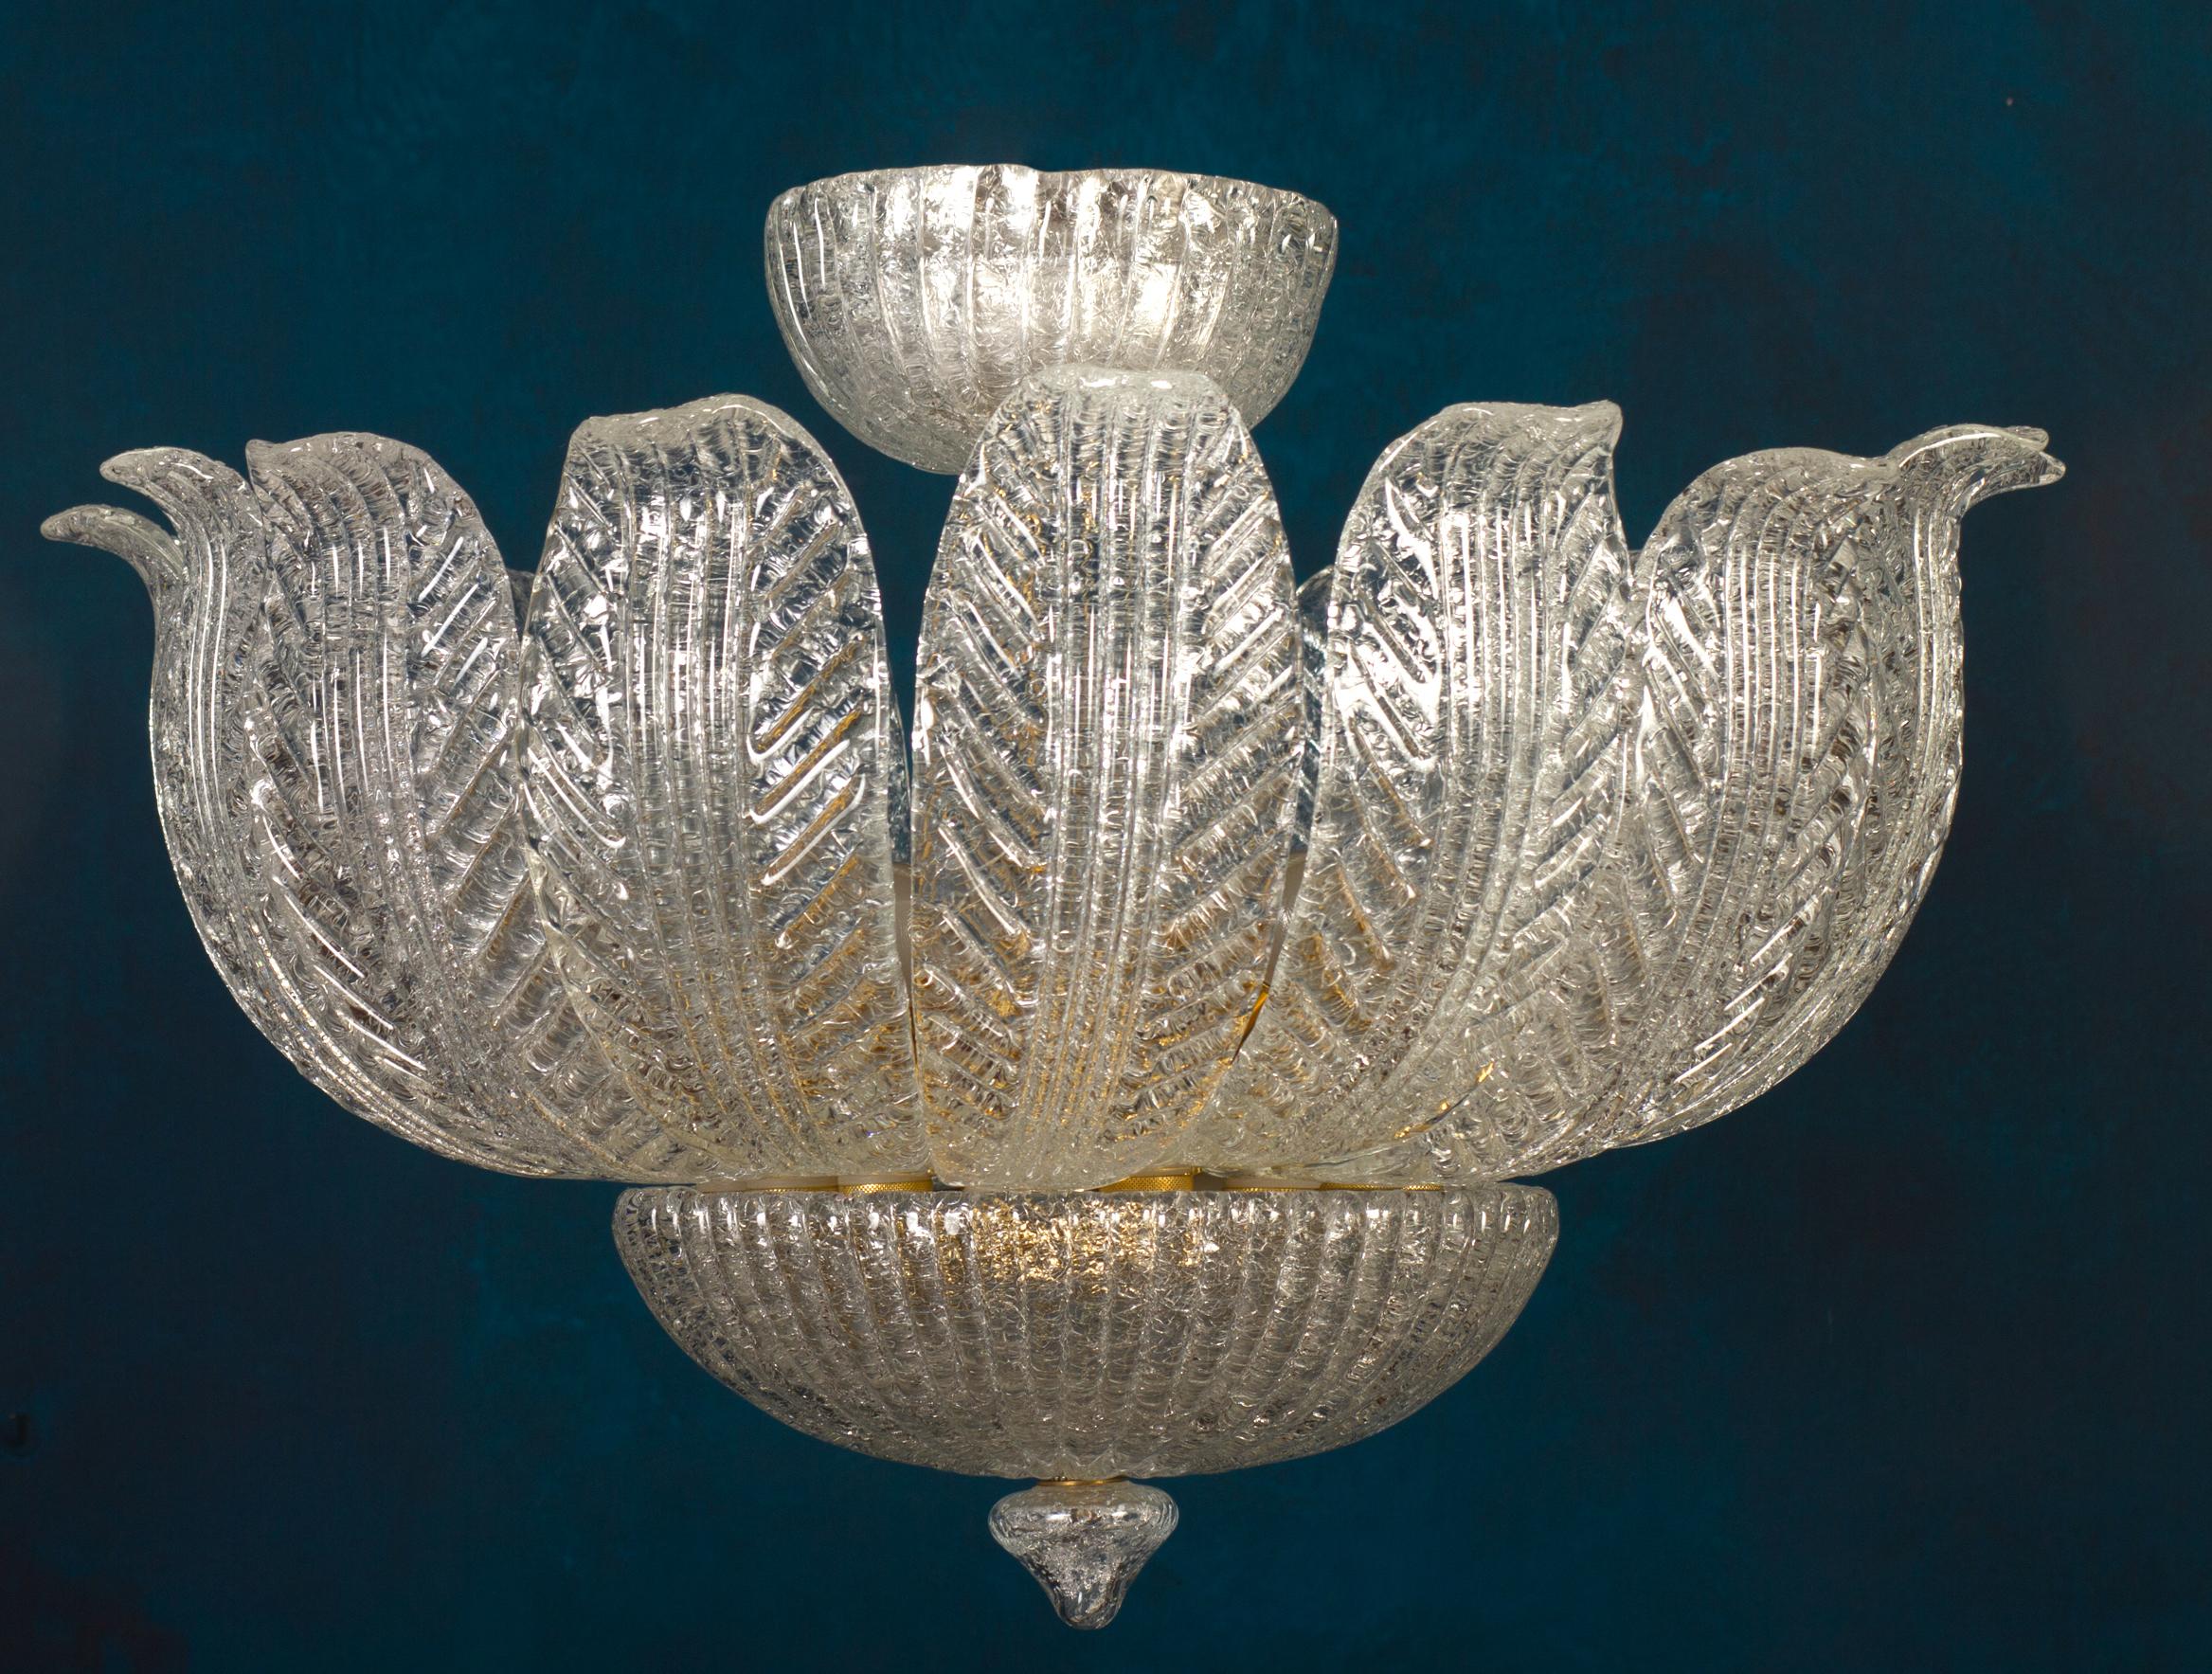 Fine murano glass chandelier, made of precious hand blown ice leaves glasses, has the look of a precious big flower.
Cleaned and re-wired, in full working order and ready to use. In excellent vintage condition. The leaves, all original and in good